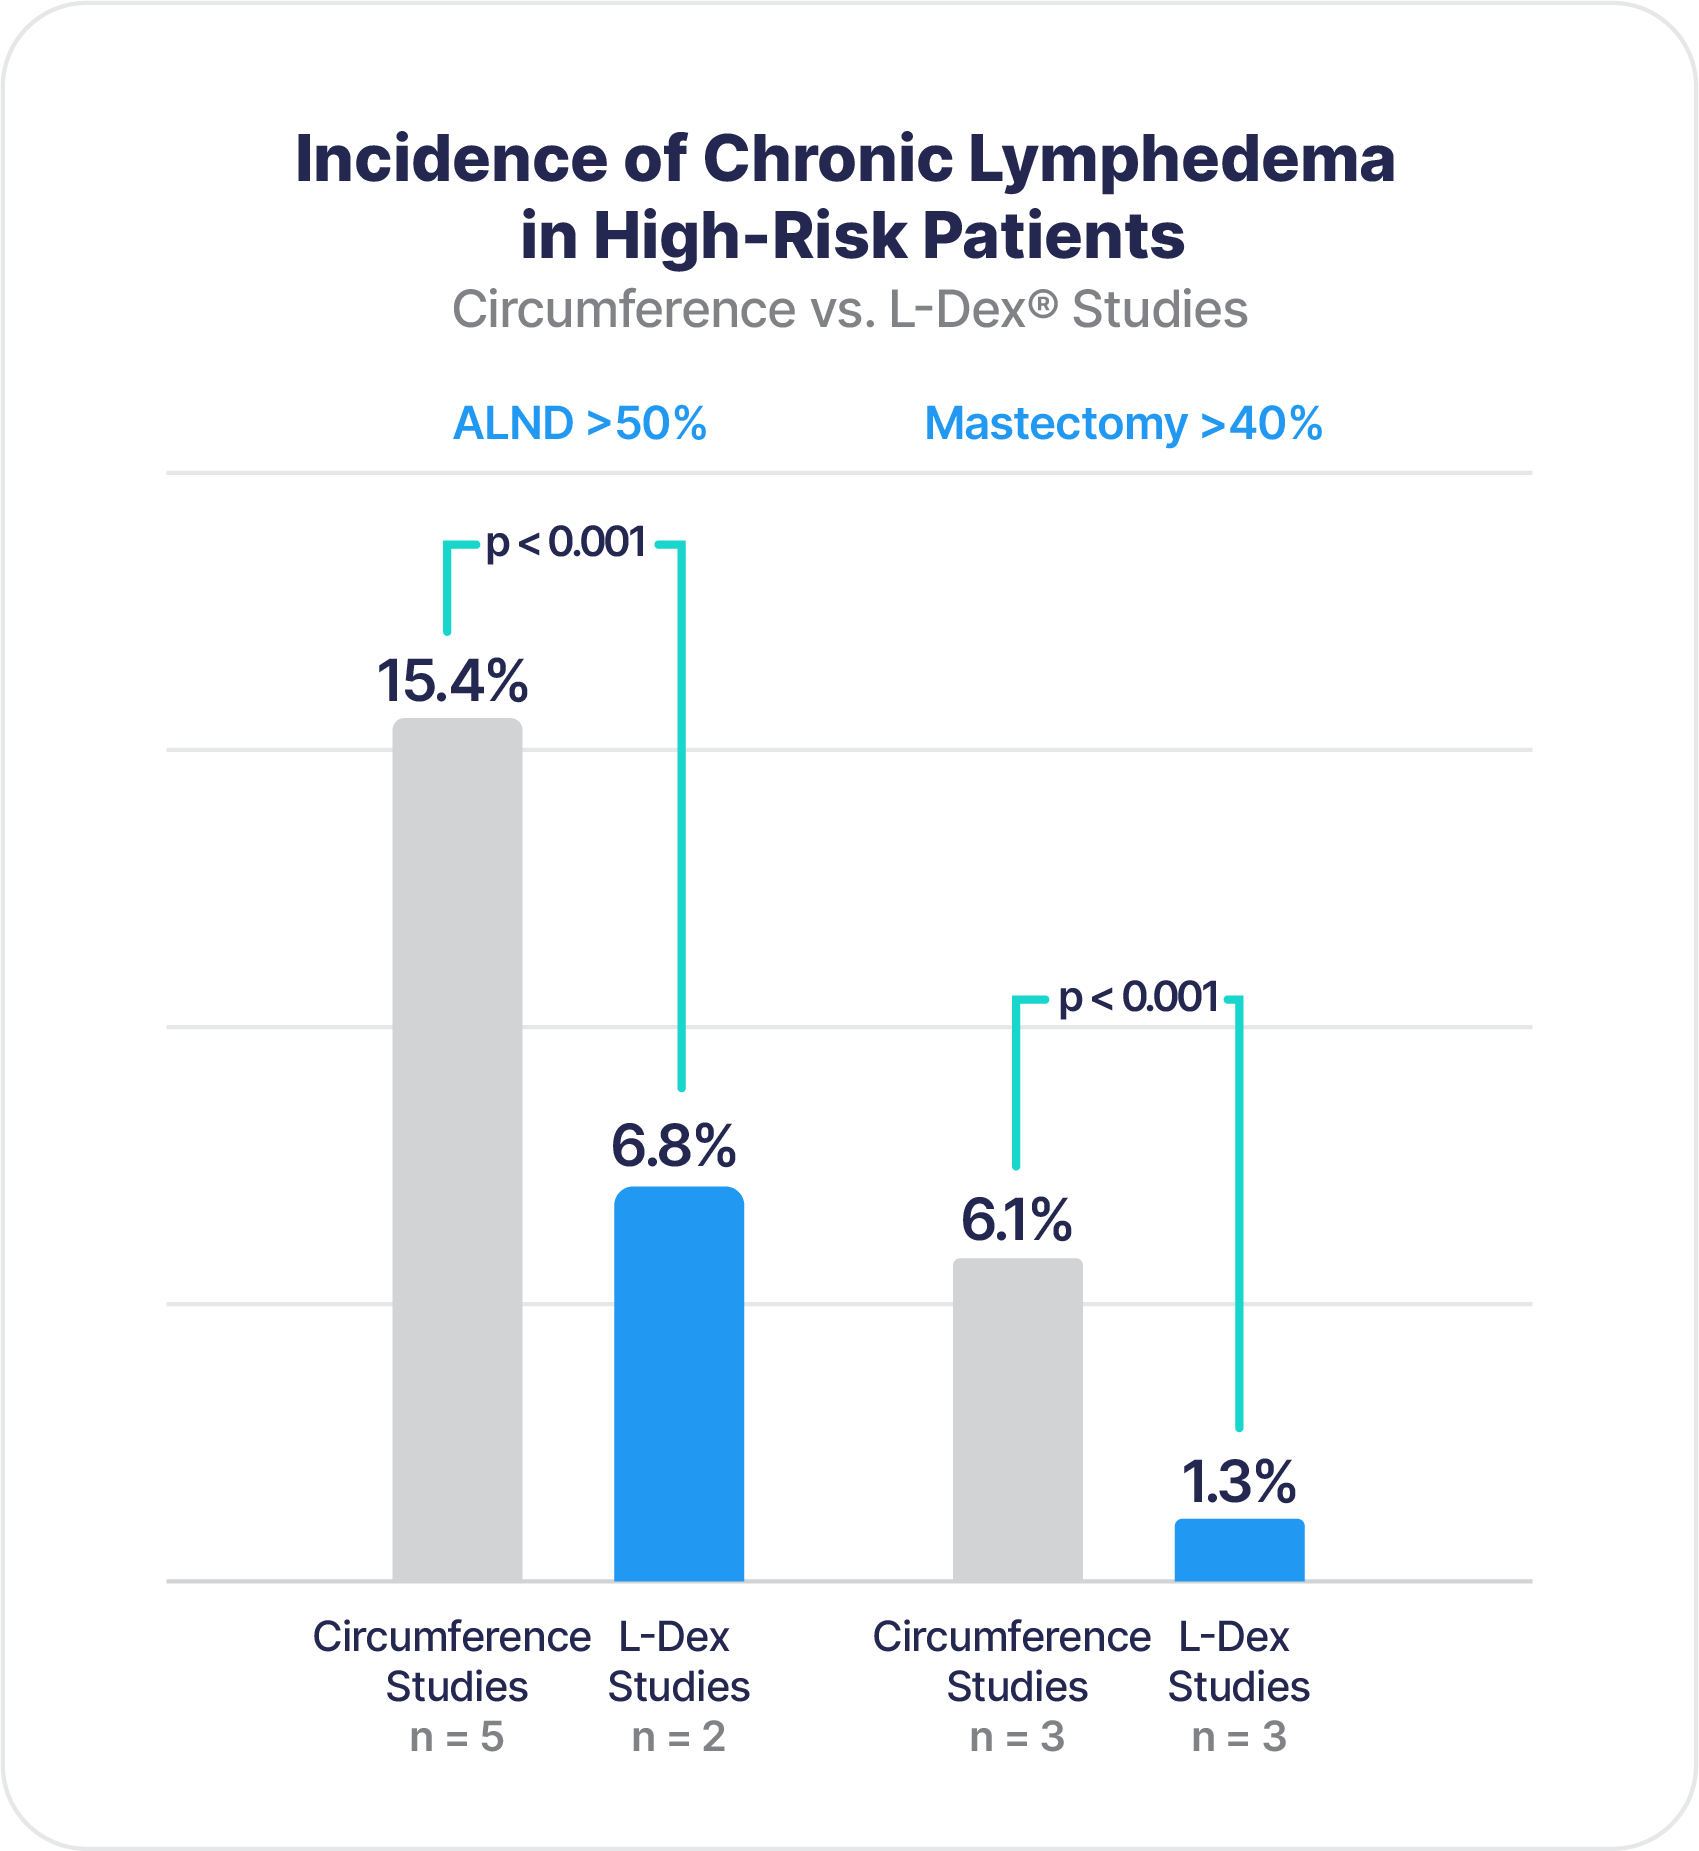 Statistically Lower Rates of Chronic Lymphedema in High-Risk Patients and Short-Term and Long-Term Follow-up